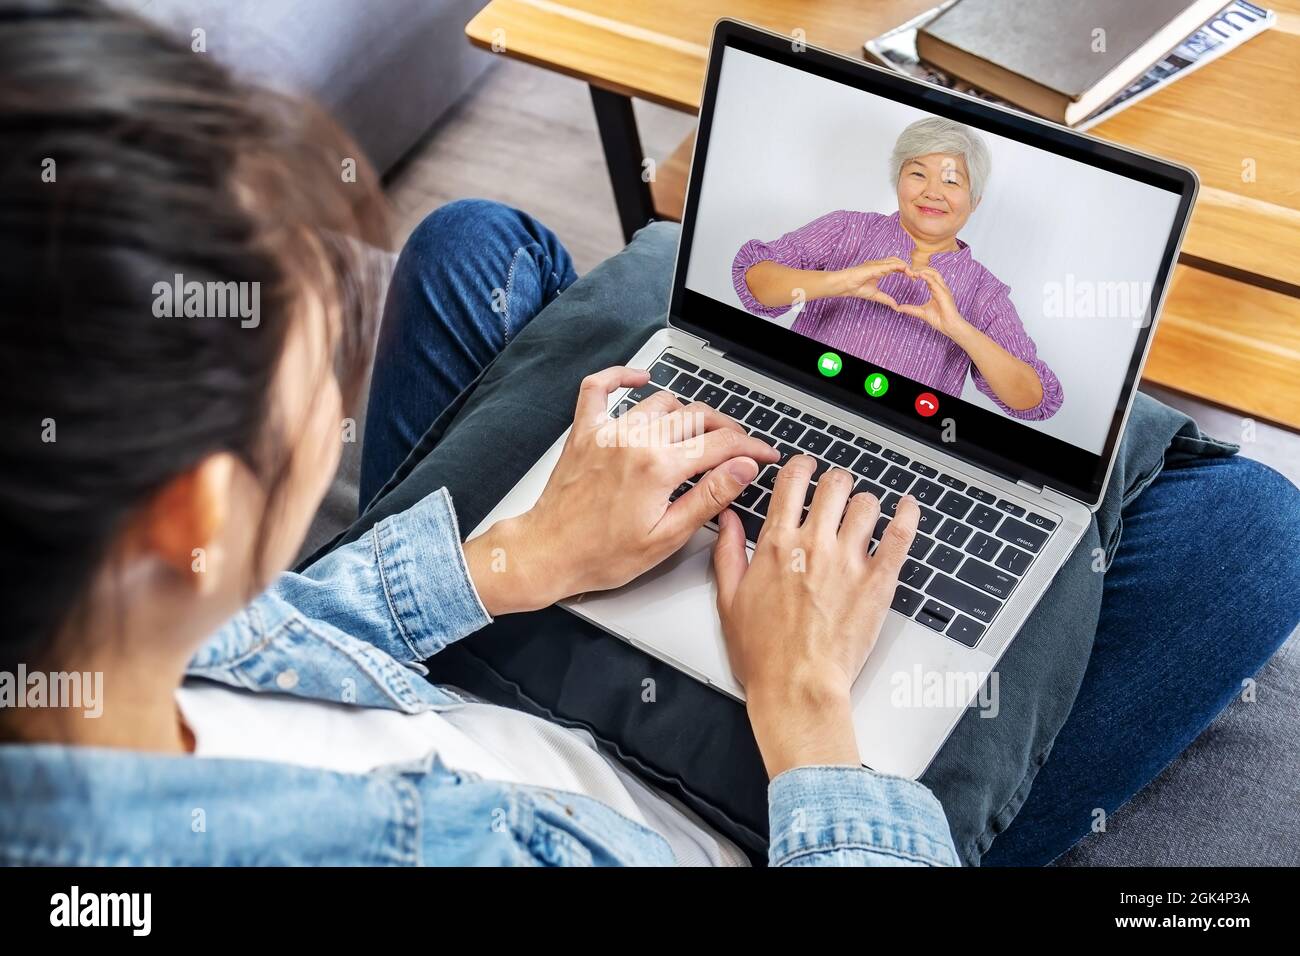 Happy senior woman or mother making video call with grown up young daughter woman Stock Photo